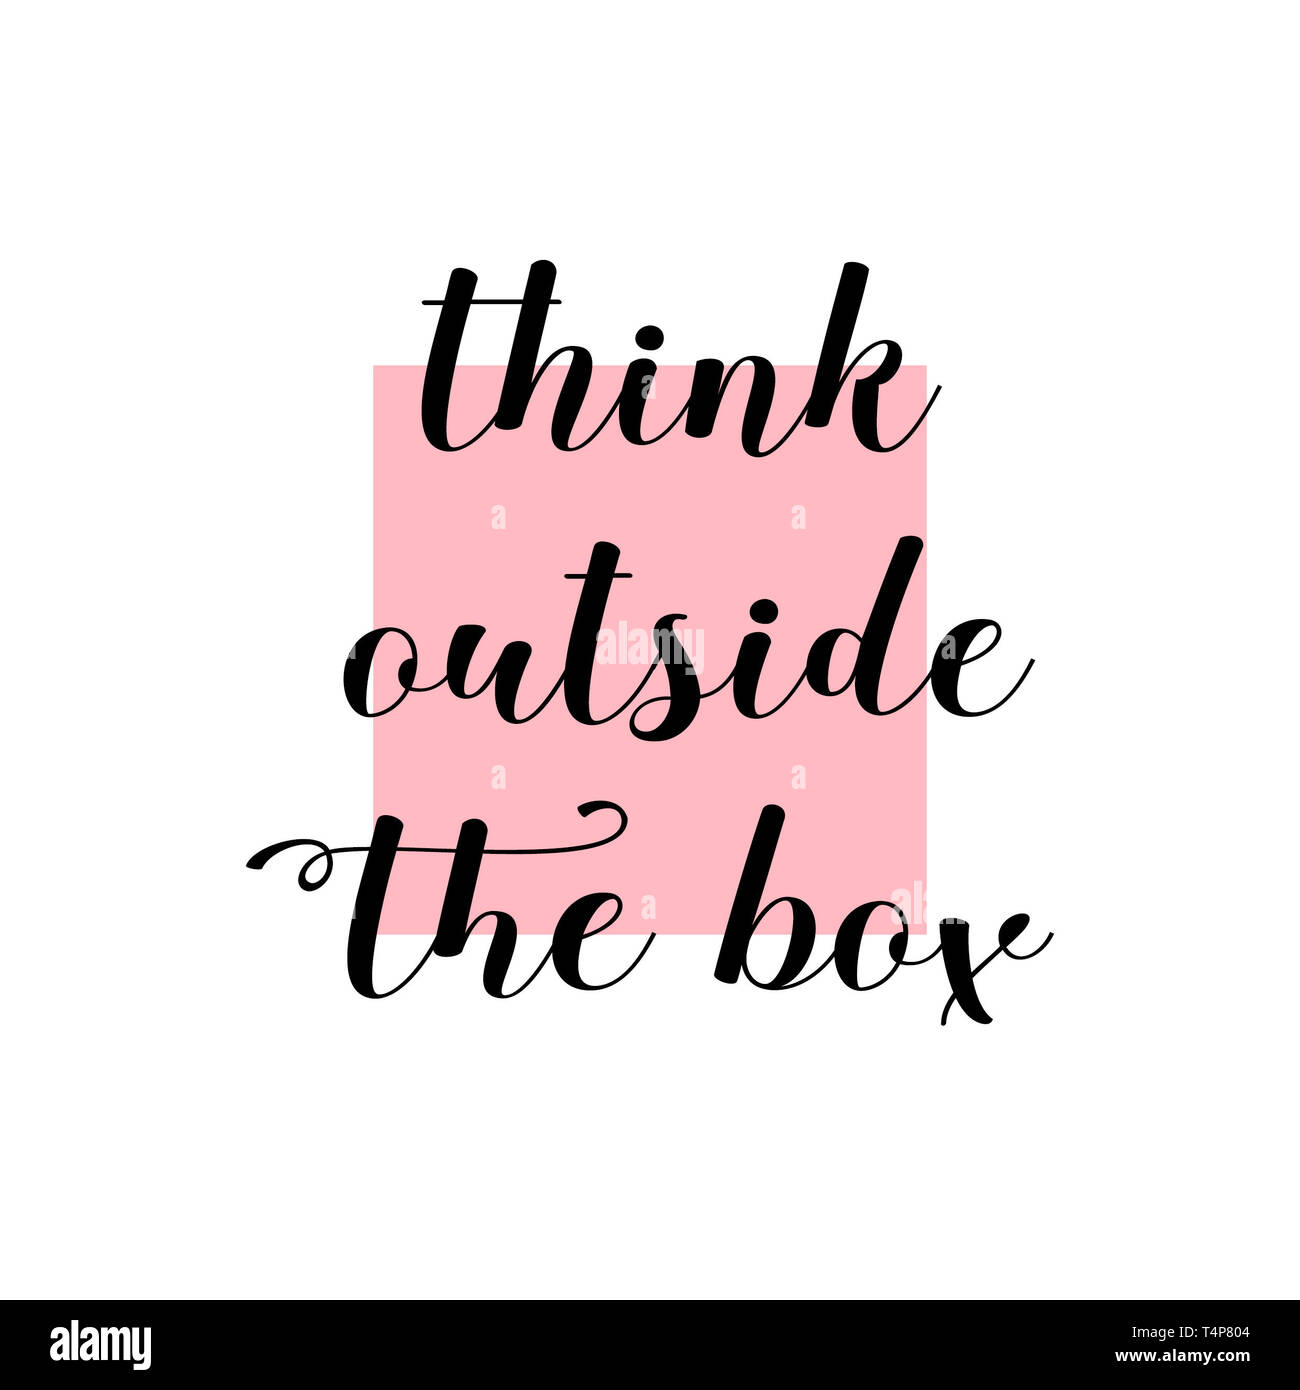 Think outside the box. Inspirational quote calligraphy with pink background. Stock Photo